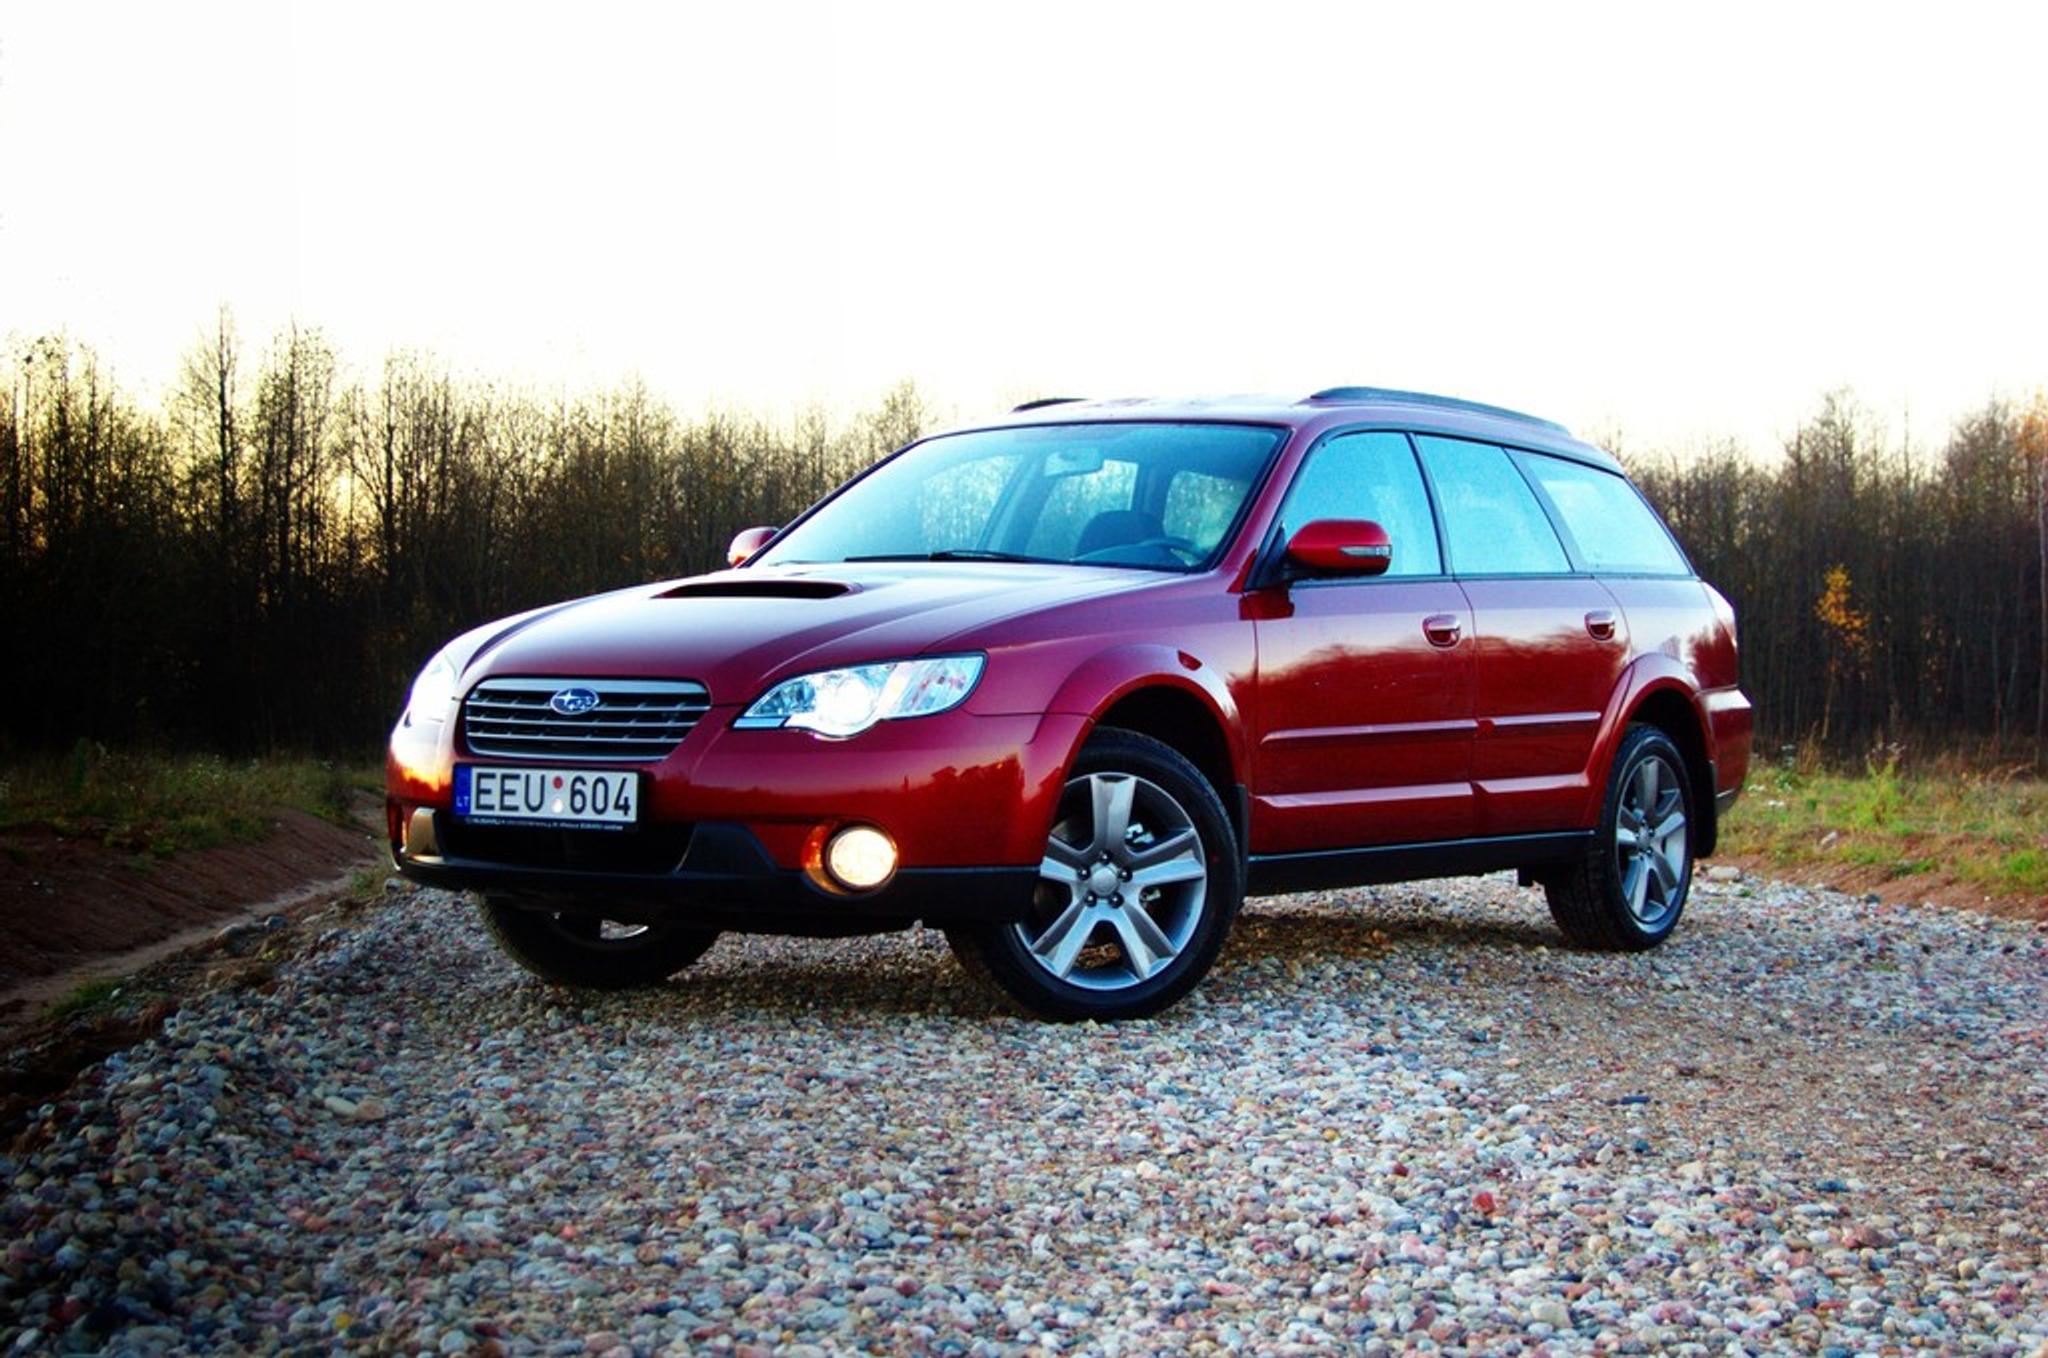 Red Subaru Outback on gravel